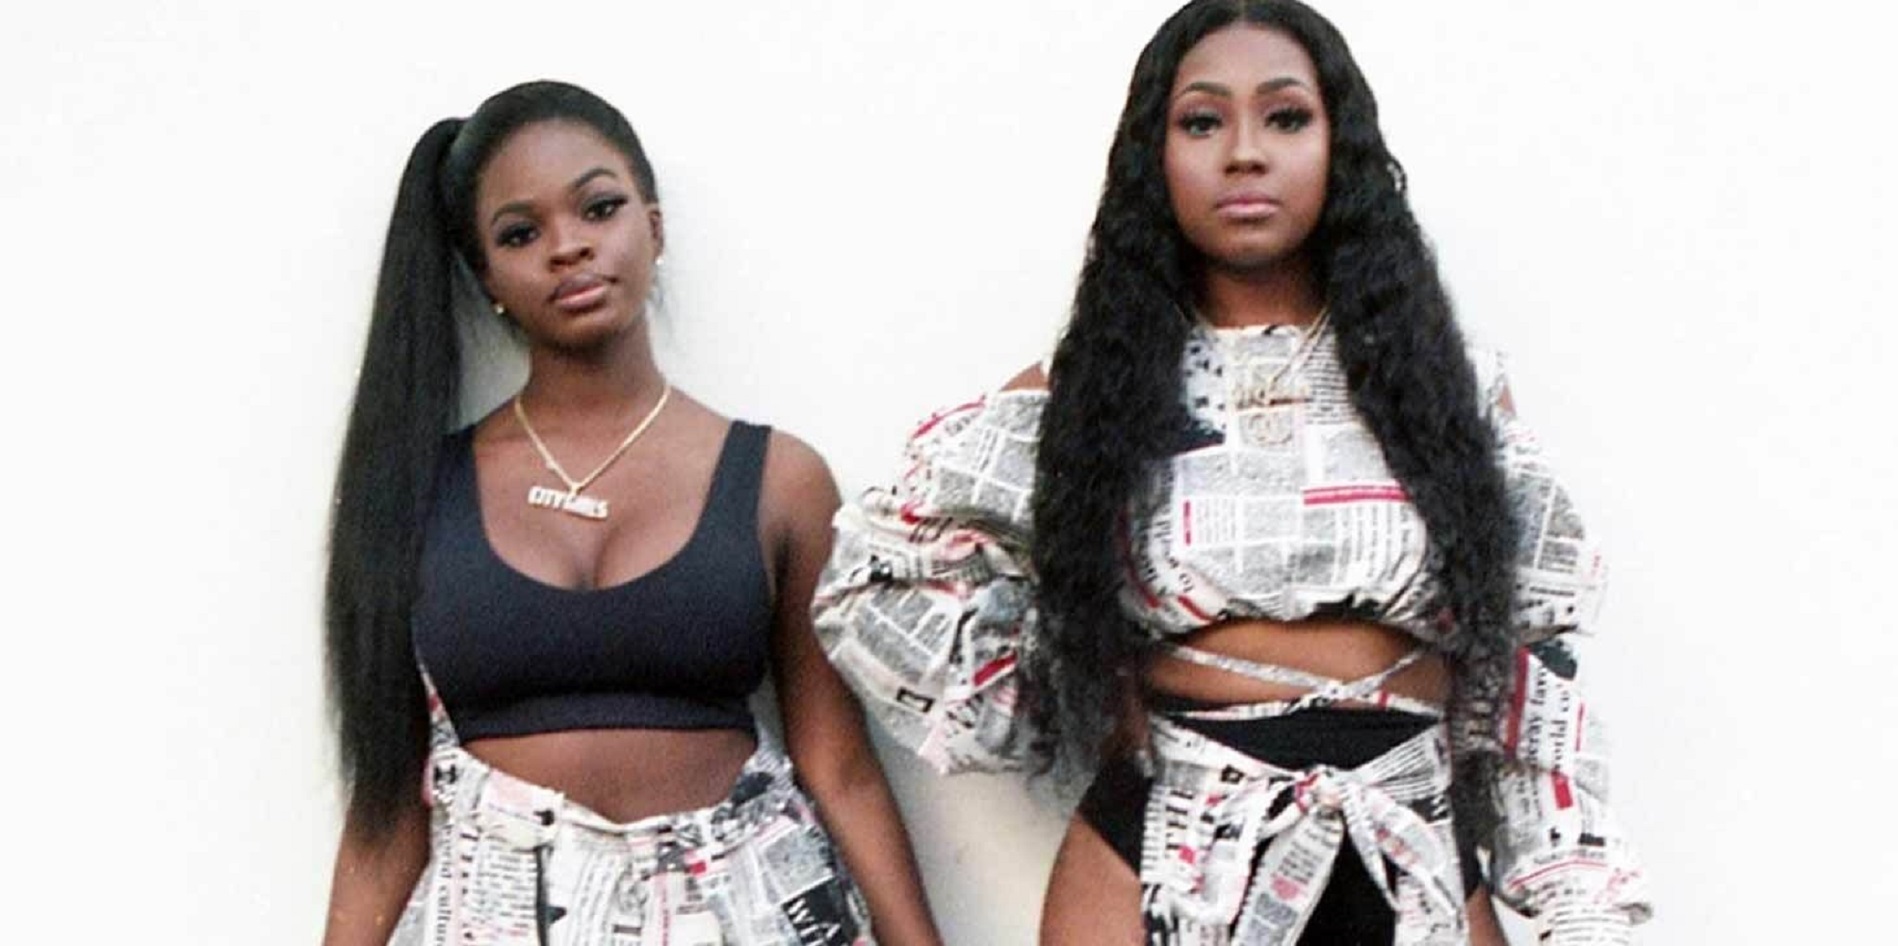 Pregnant Rapper From ‘City Girls’ Shot at 14 Times!